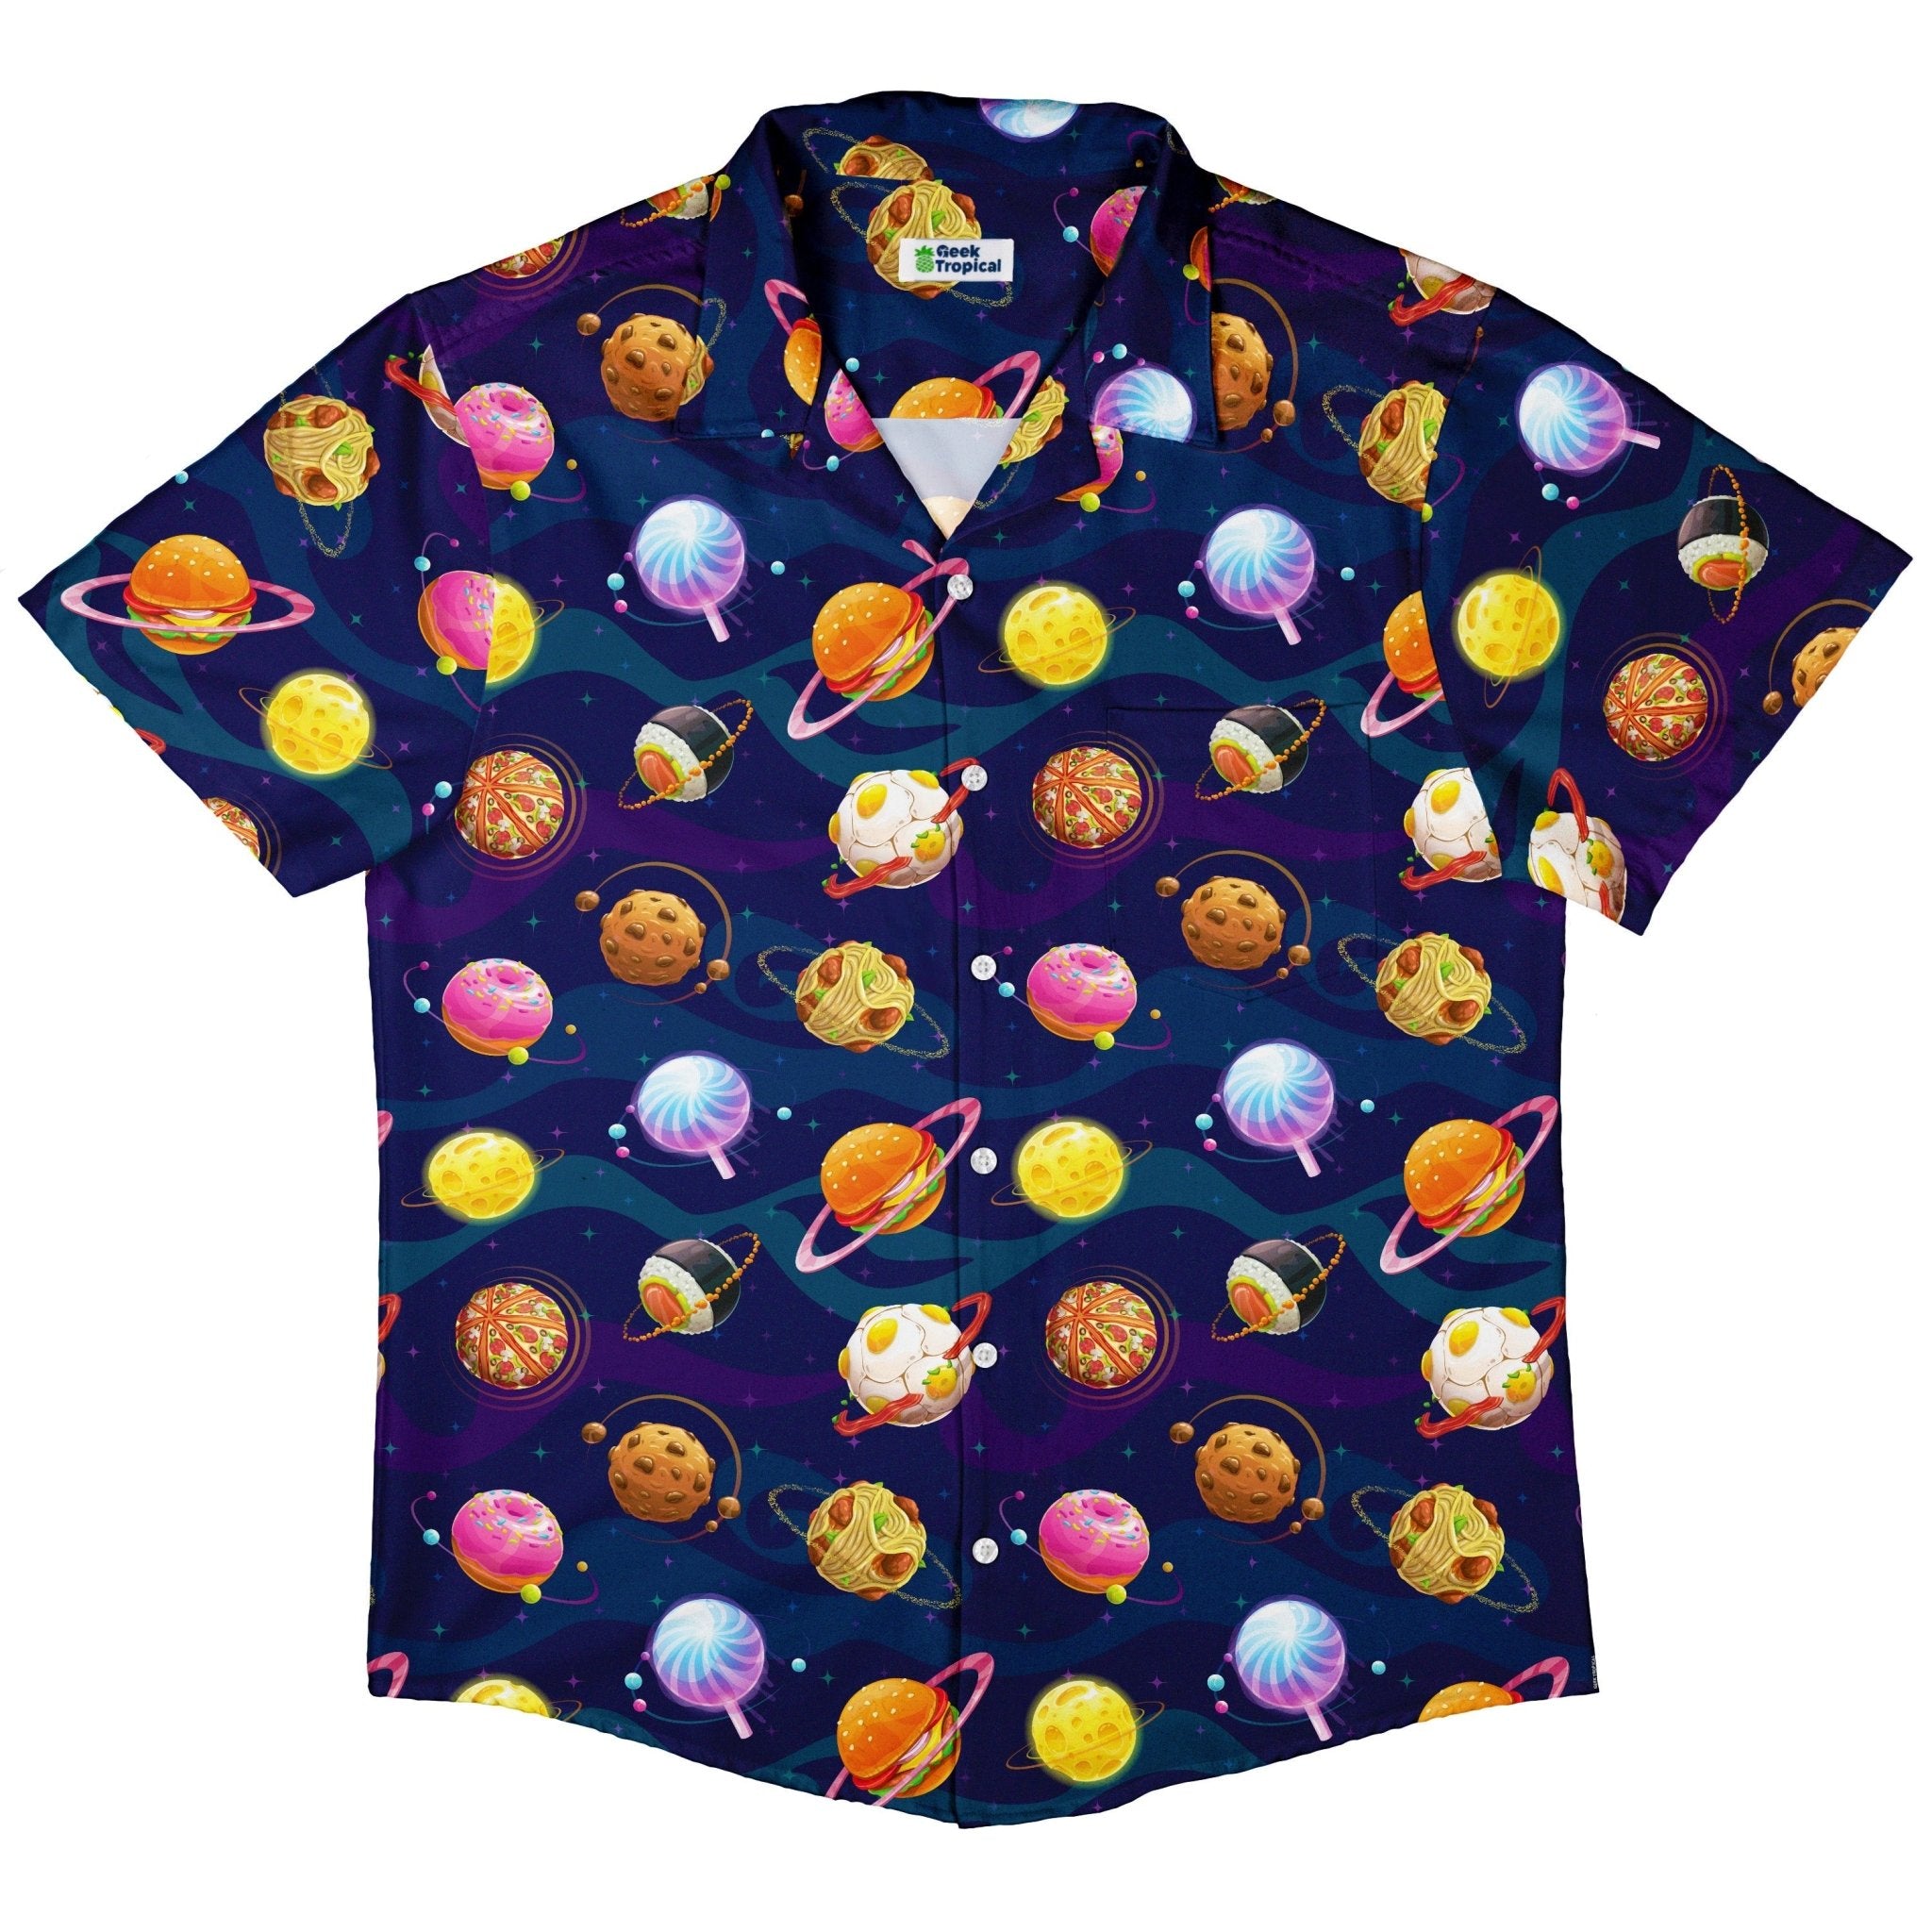 Cartoon Planet Food Space Blue Purple Button Up Shirt - adult sizing - Maximalist Patterns - outer space & astronaut print